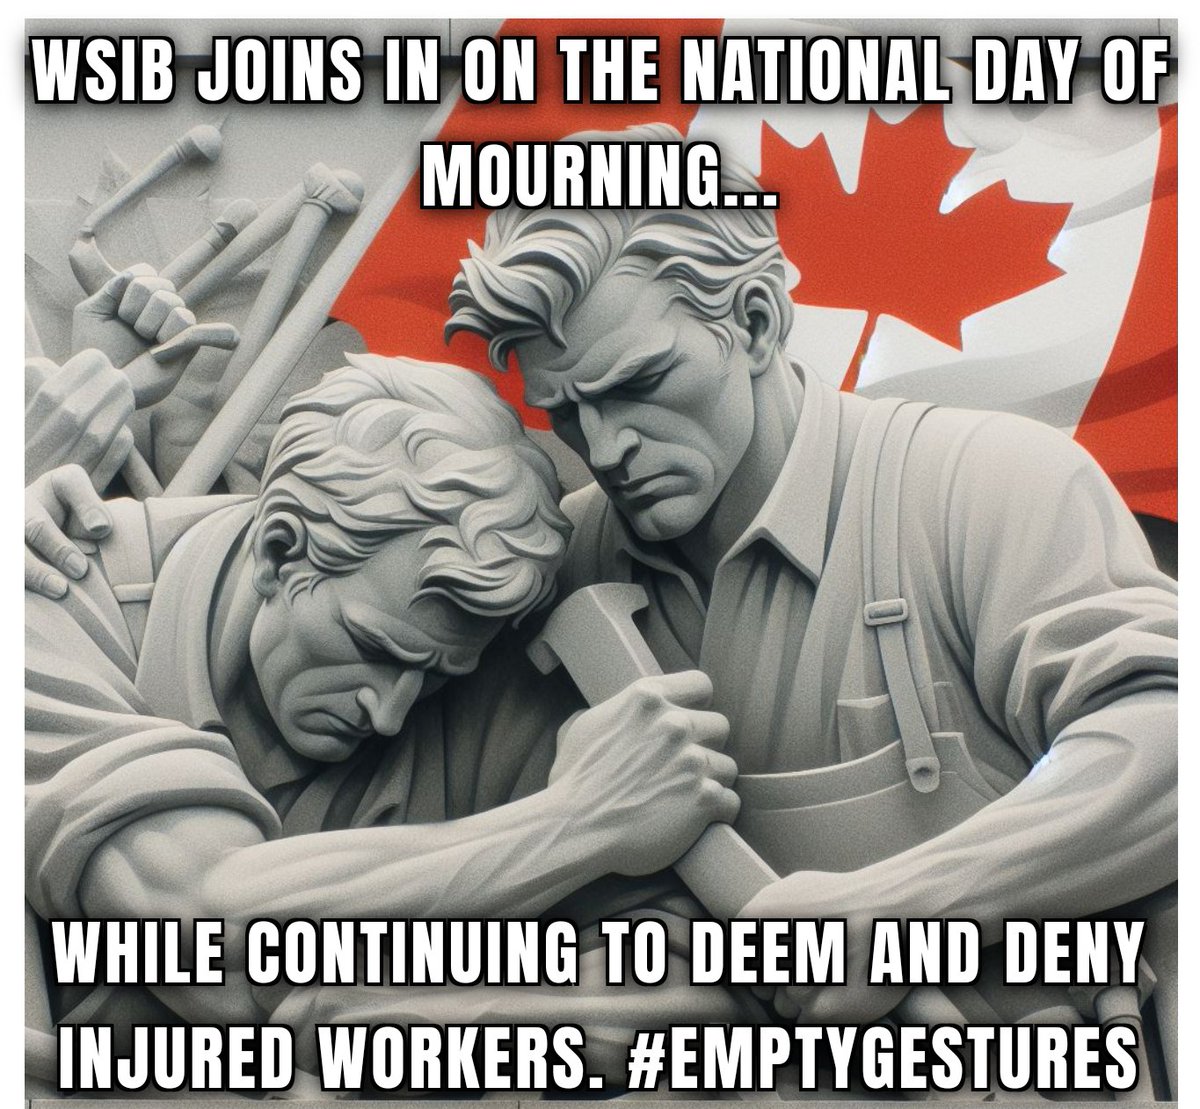 #WSIB #WCB joins in on the national day of mourning...while continuing to deem and deny #injuredworkers. #EmptyGestures won't bring back lost lives or provide justice for those still suffering. Actions speak louder than words.